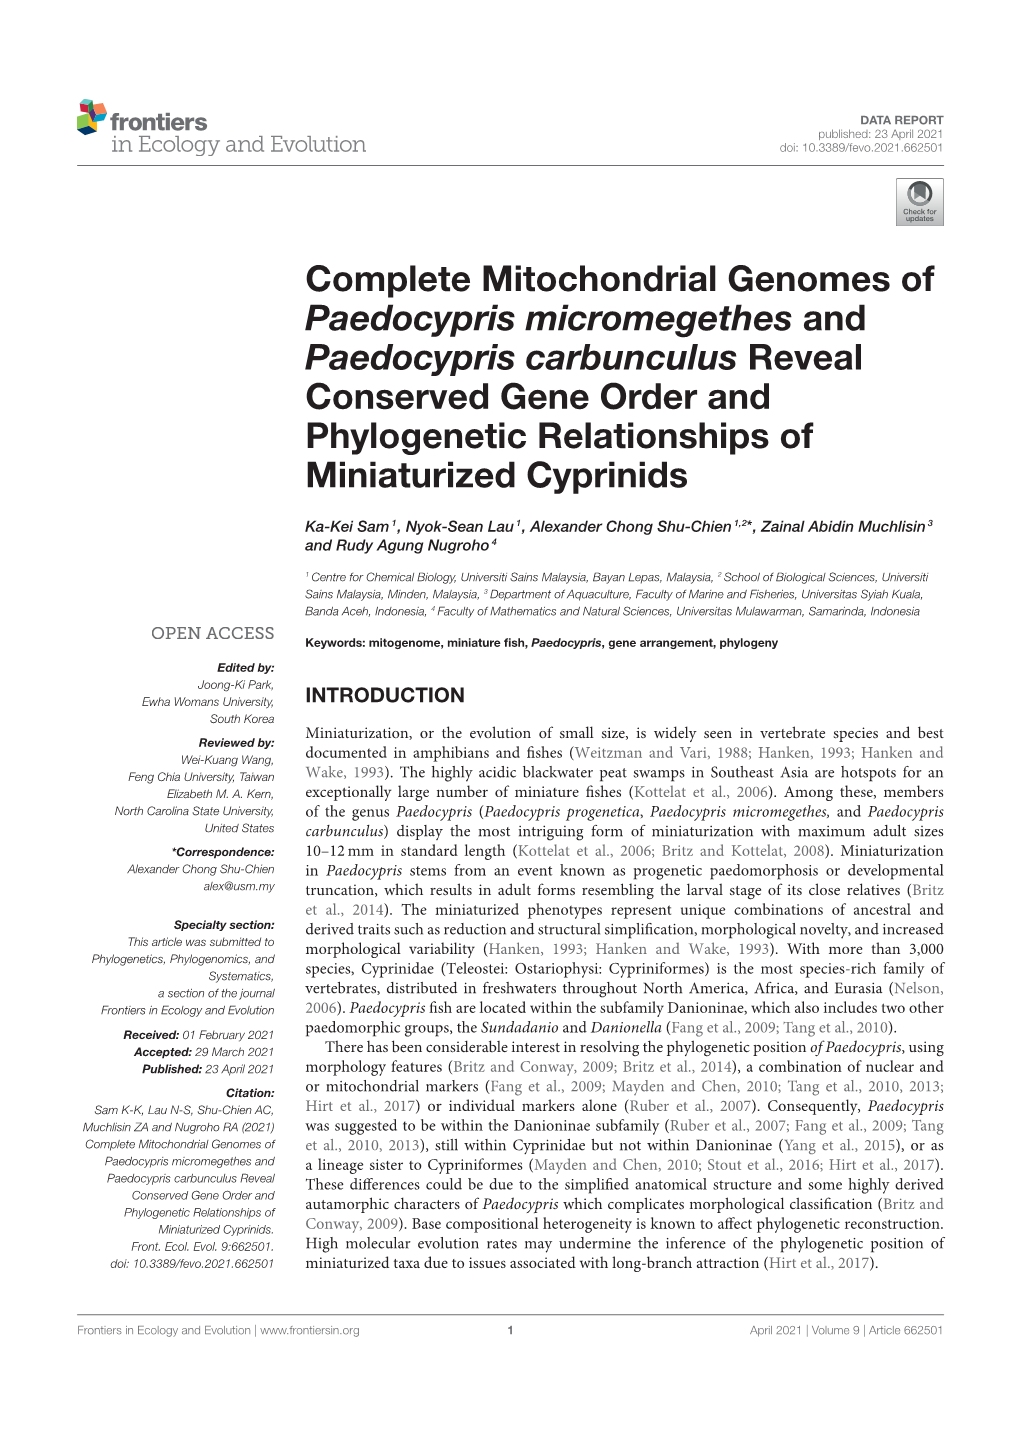 Complete Mitochondrial Genomes of Paedocypris Micromegethes and Paedocypris Carbunculus Reveal Conserved Gene Order and Phylogen